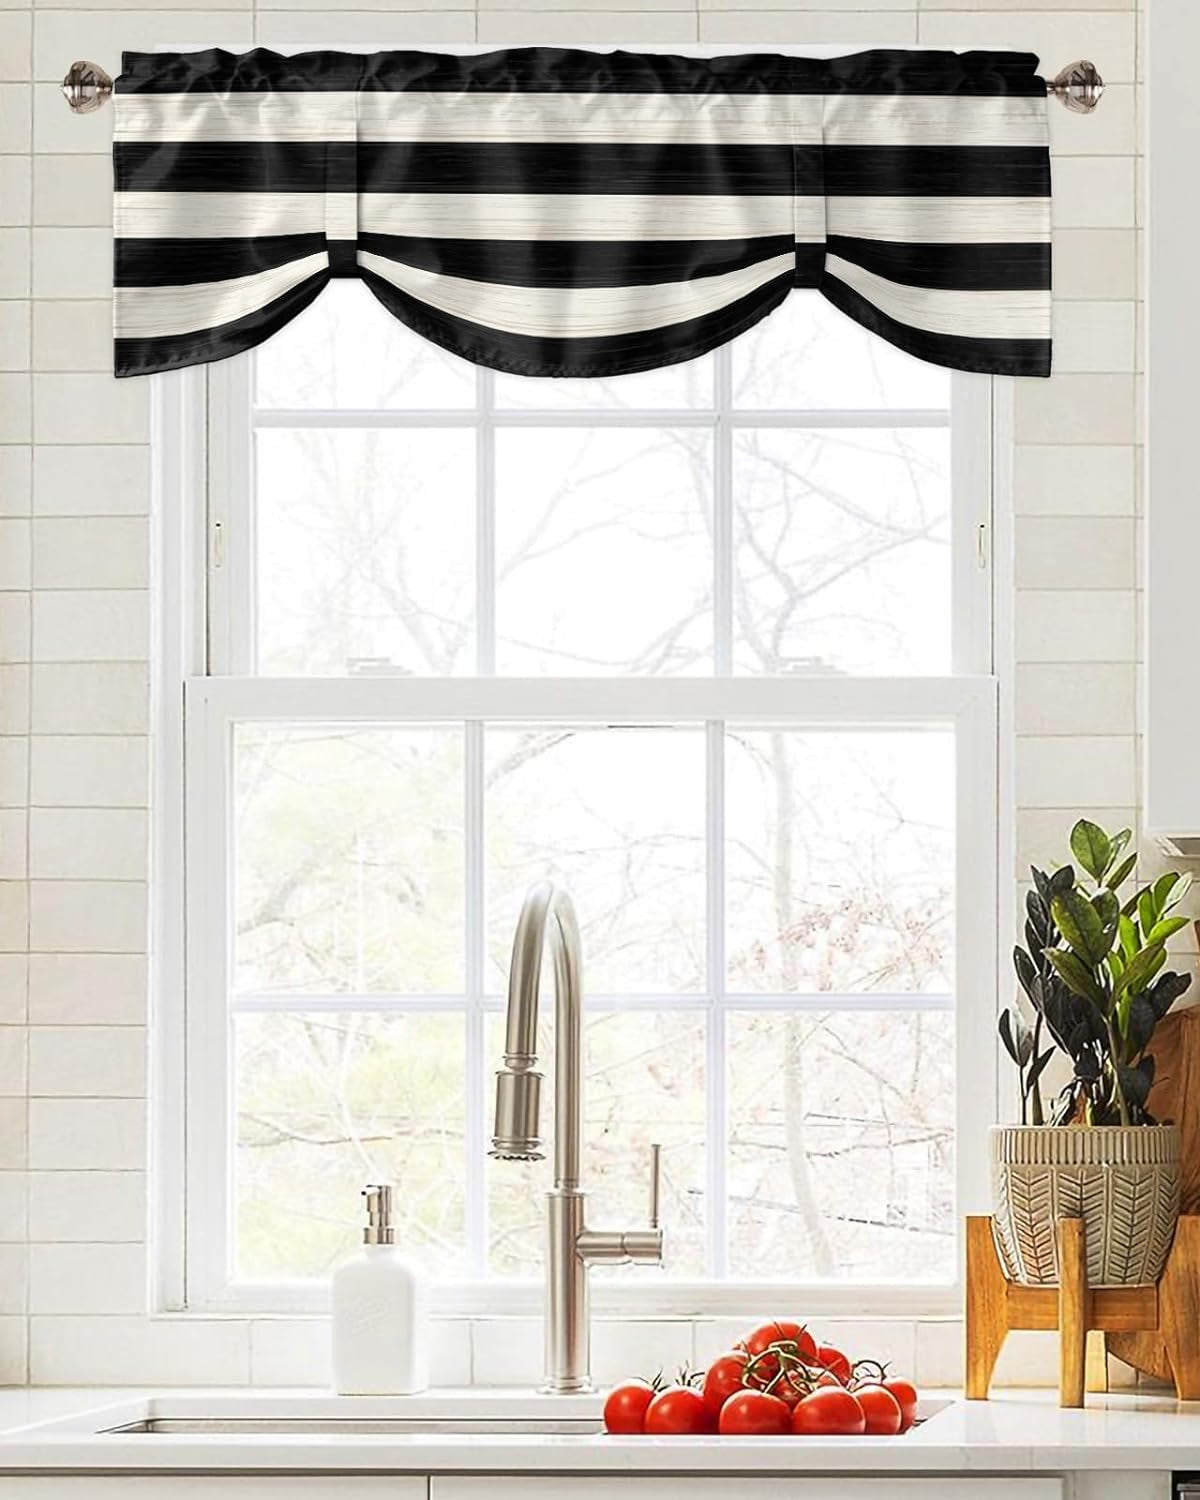 Black and White Stripe Tie up Curtain Valance Window Topper 1 Panel 42X18In,Wood Board Texture Adjustable Rod Pocket Short Window Shade Valances for Kitchen Bedroom Windows